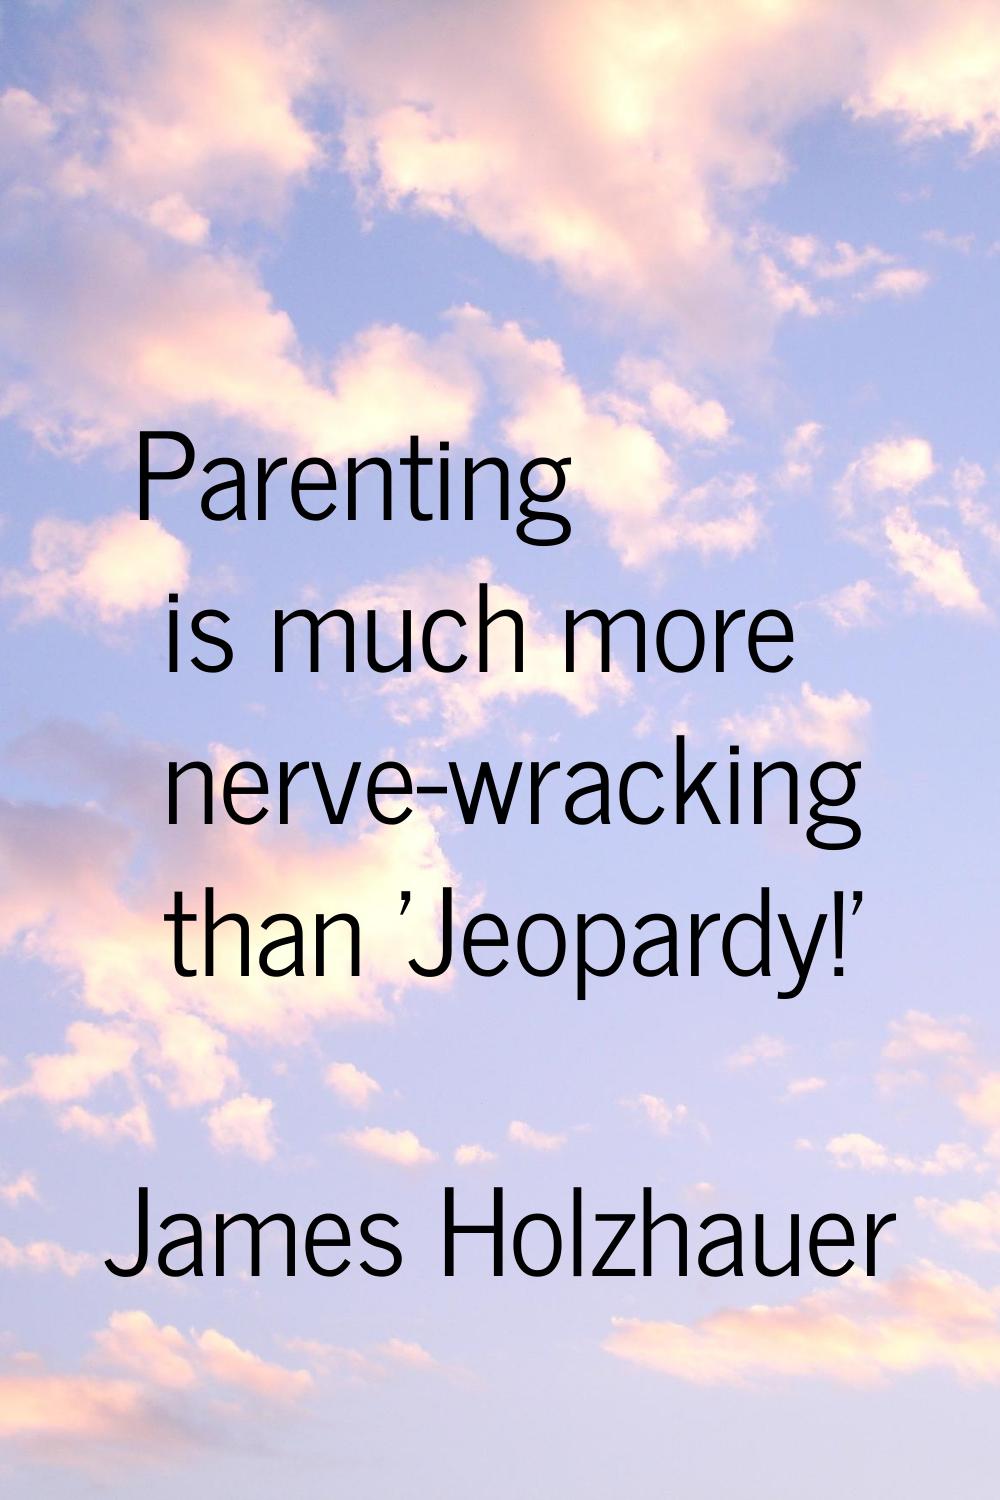 Parenting is much more nerve-wracking than 'Jeopardy!'